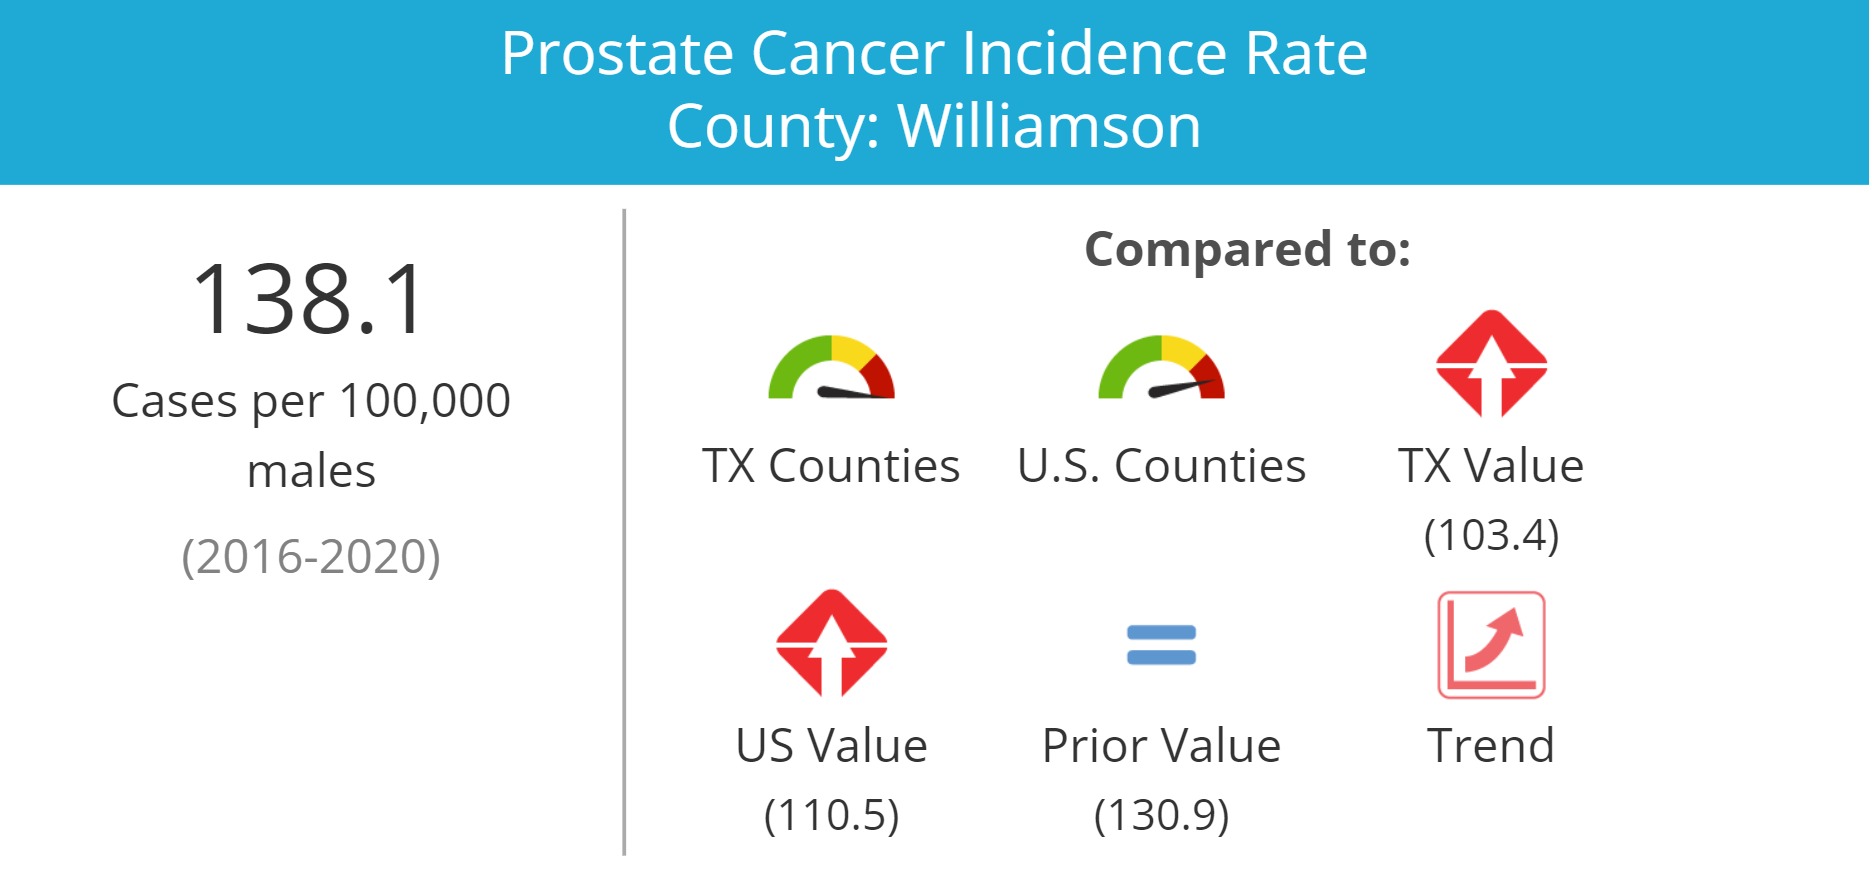 Prostate Cancer Incidence Rate County_ Williamson.jpg